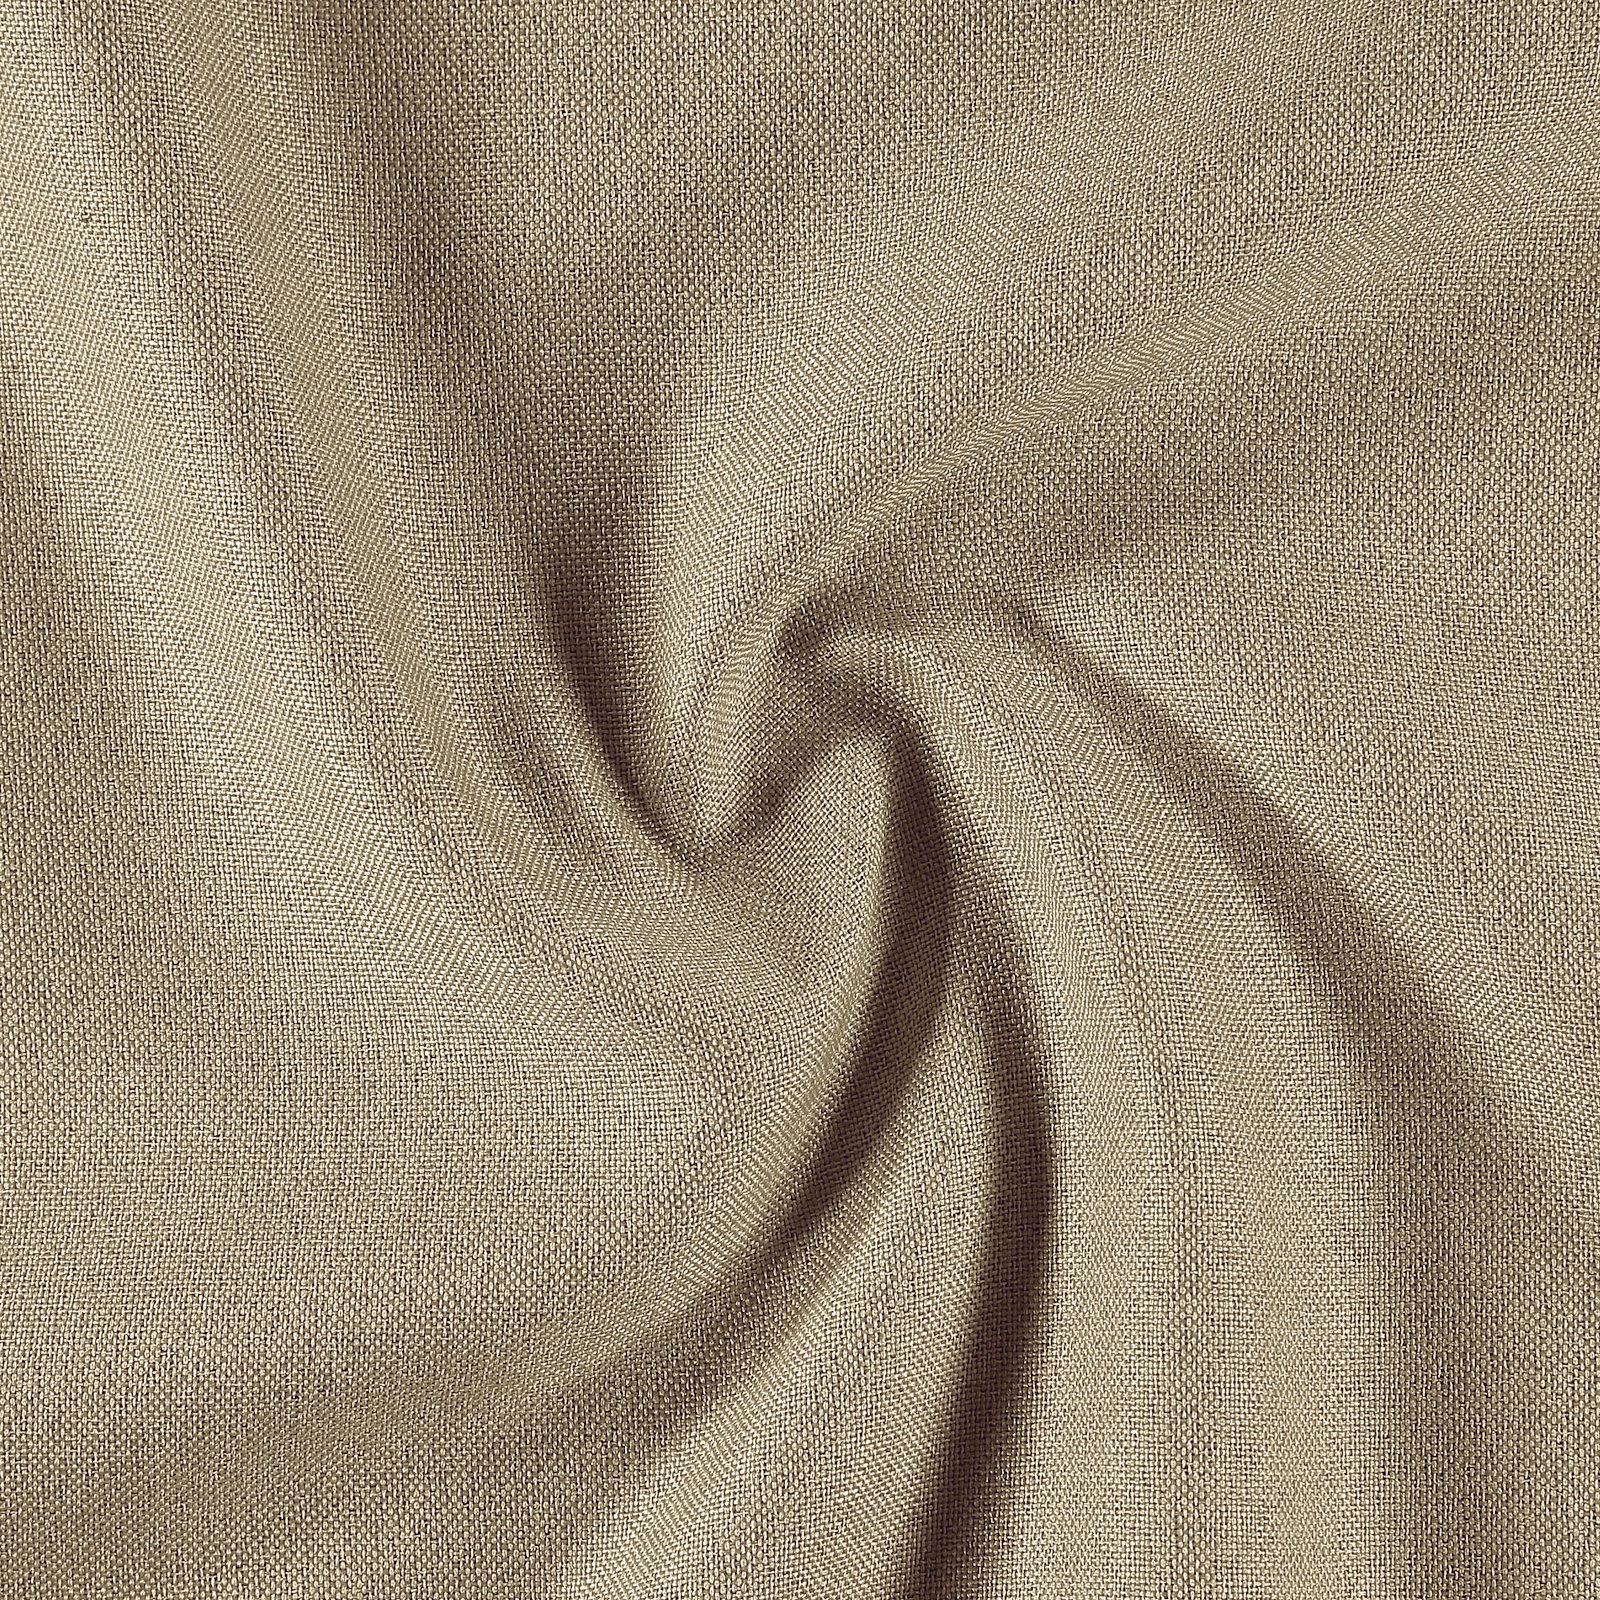 Woven dimout texture sand 815279_pack